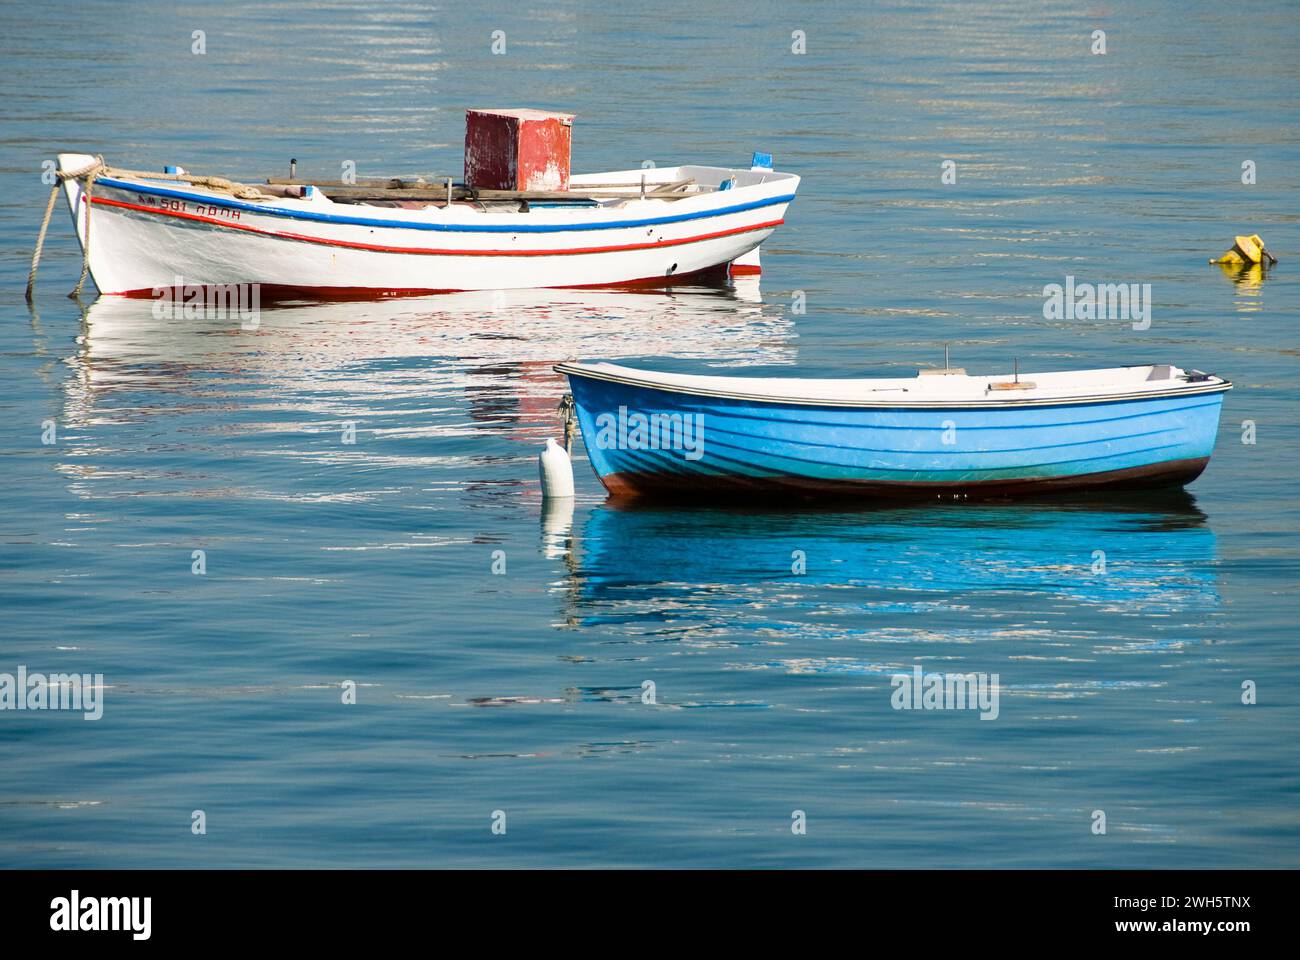 The Fishing boats on the Greek Cyclades island of Milos. Stock Photo